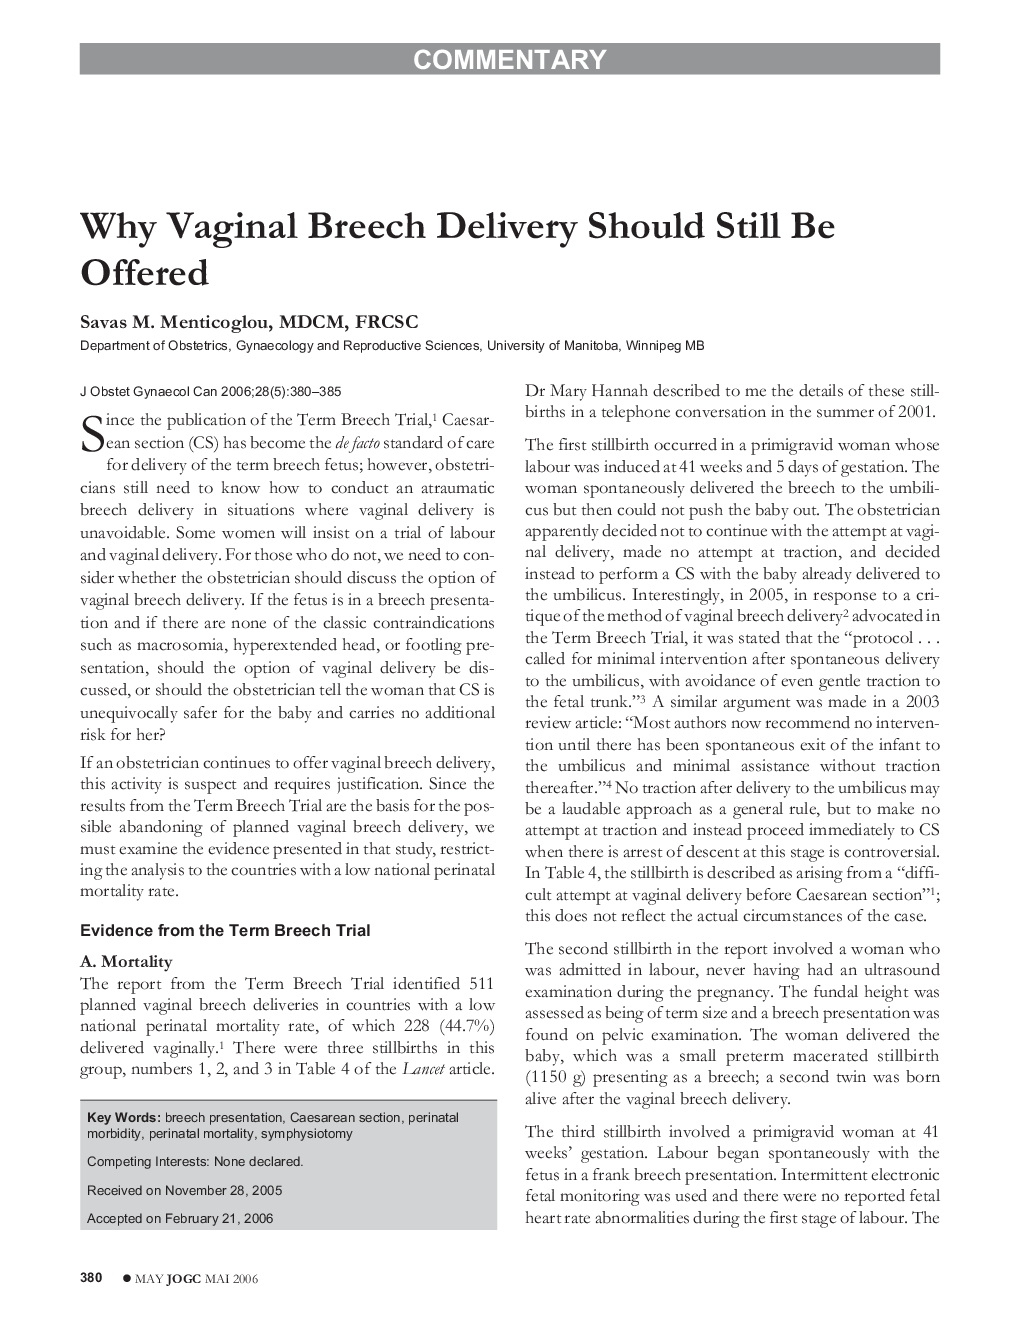 Why Vaginal Breech Delivery Should Still Be Offered